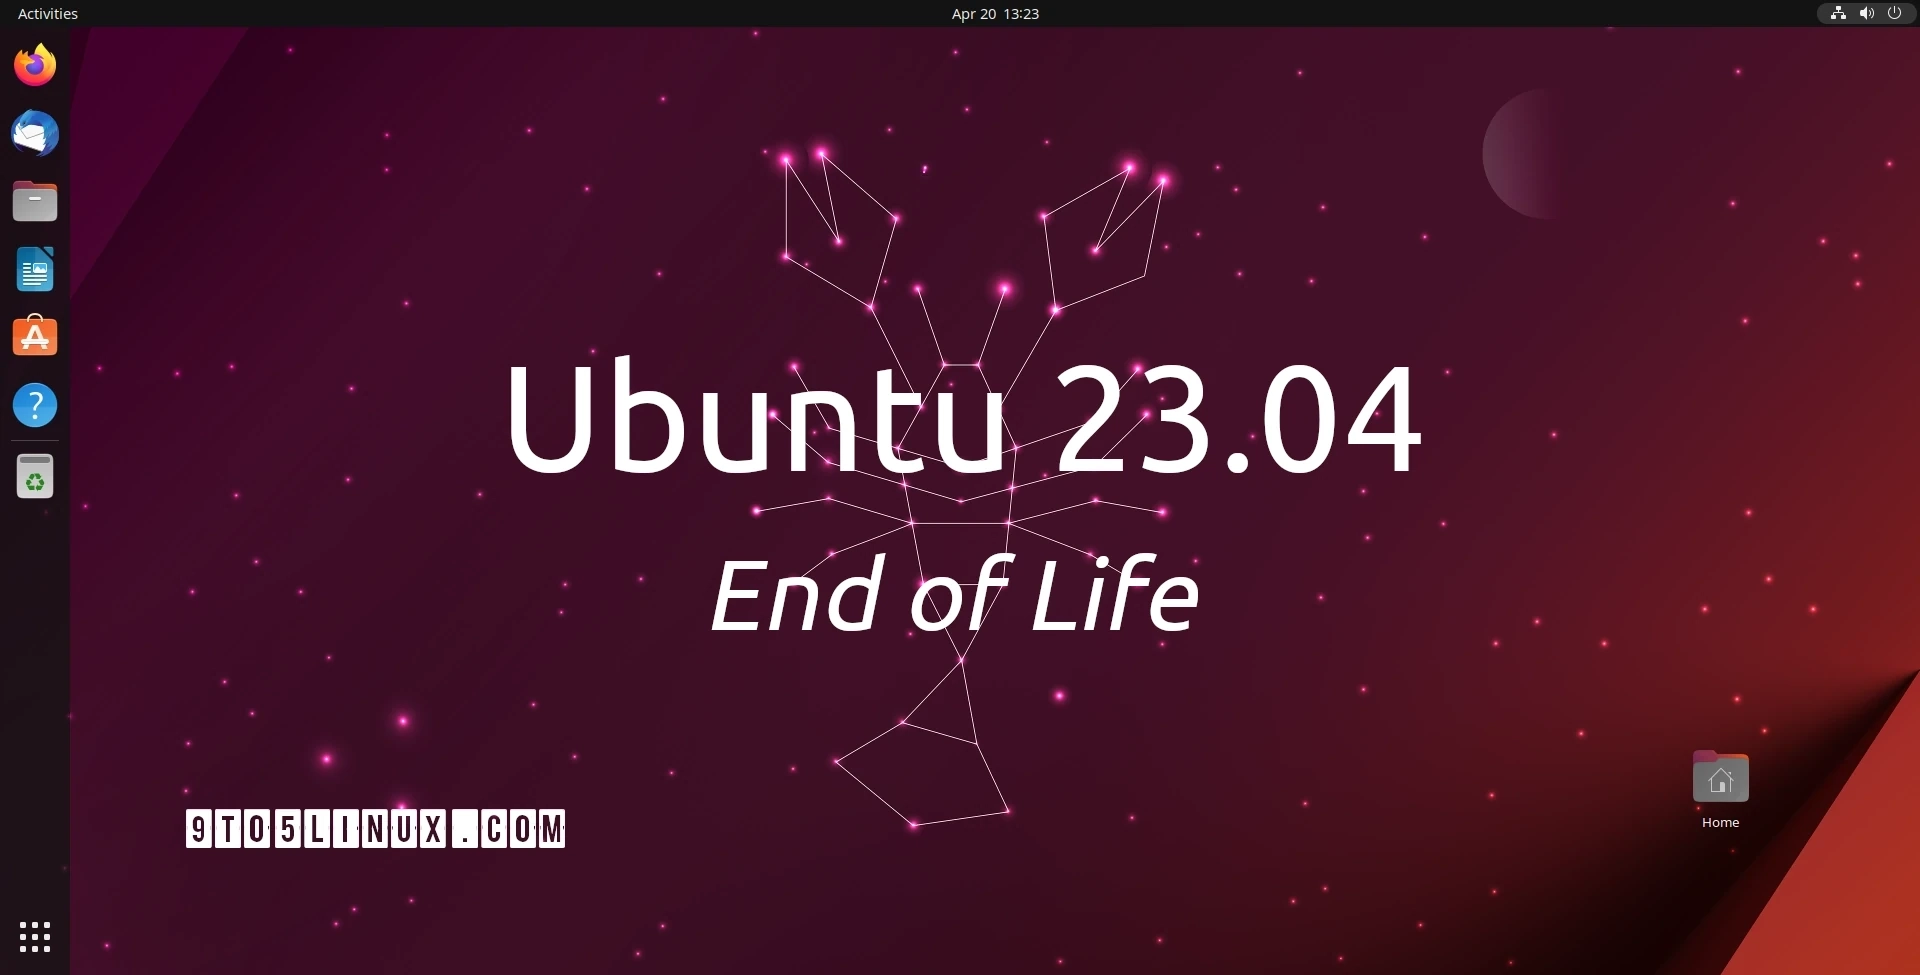 End of Life for Ubuntu 23.04 “Lunar Lobster”: It’s Time to Upgrade to Ubuntu 23.10